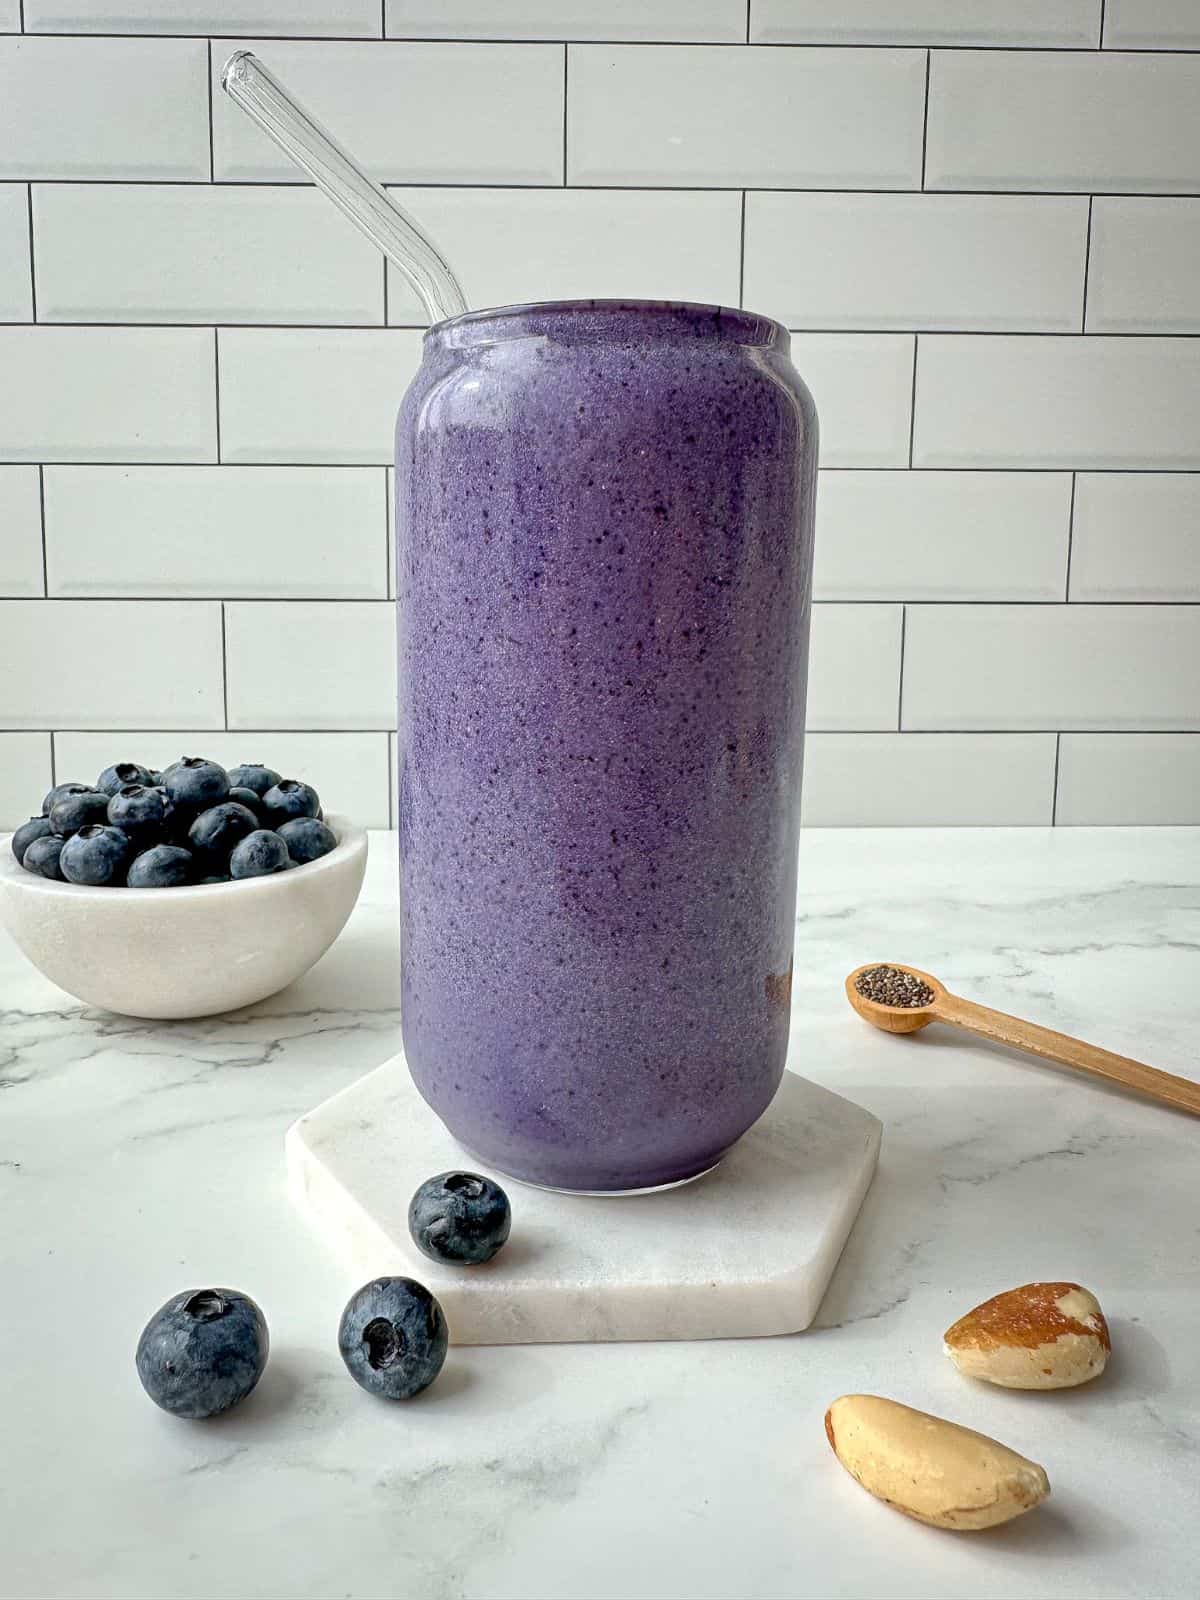 Blueberry protein shake in a clear glass with a straw. Blueberries, chia seeds, and nuts surround the glass.